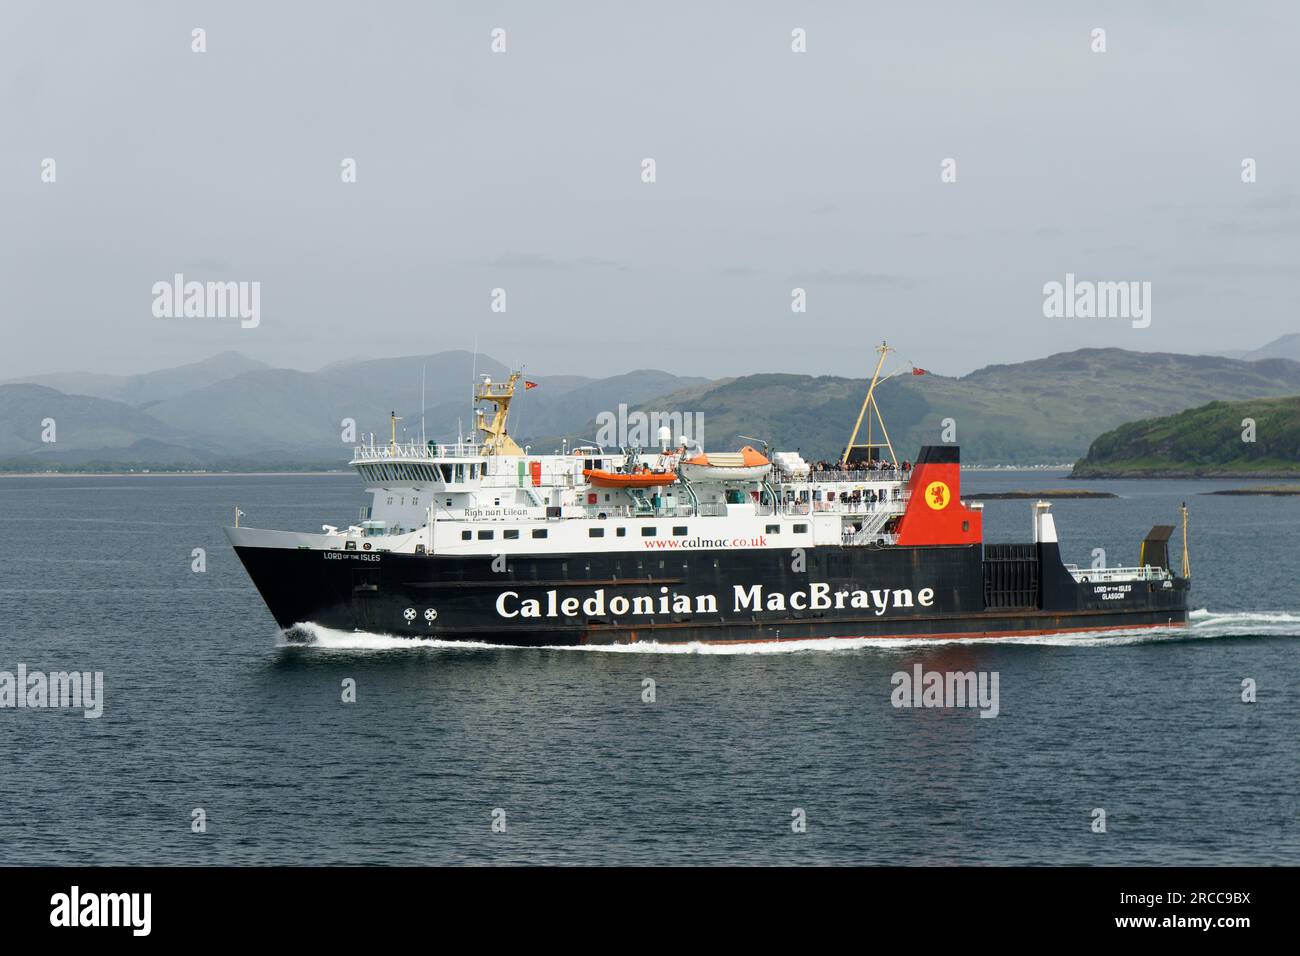 Caledonian MacBrayne car ferry Lord of the Isles leaving Oban port for the Hebridean Islands on West coast of Scotland Stock Photo